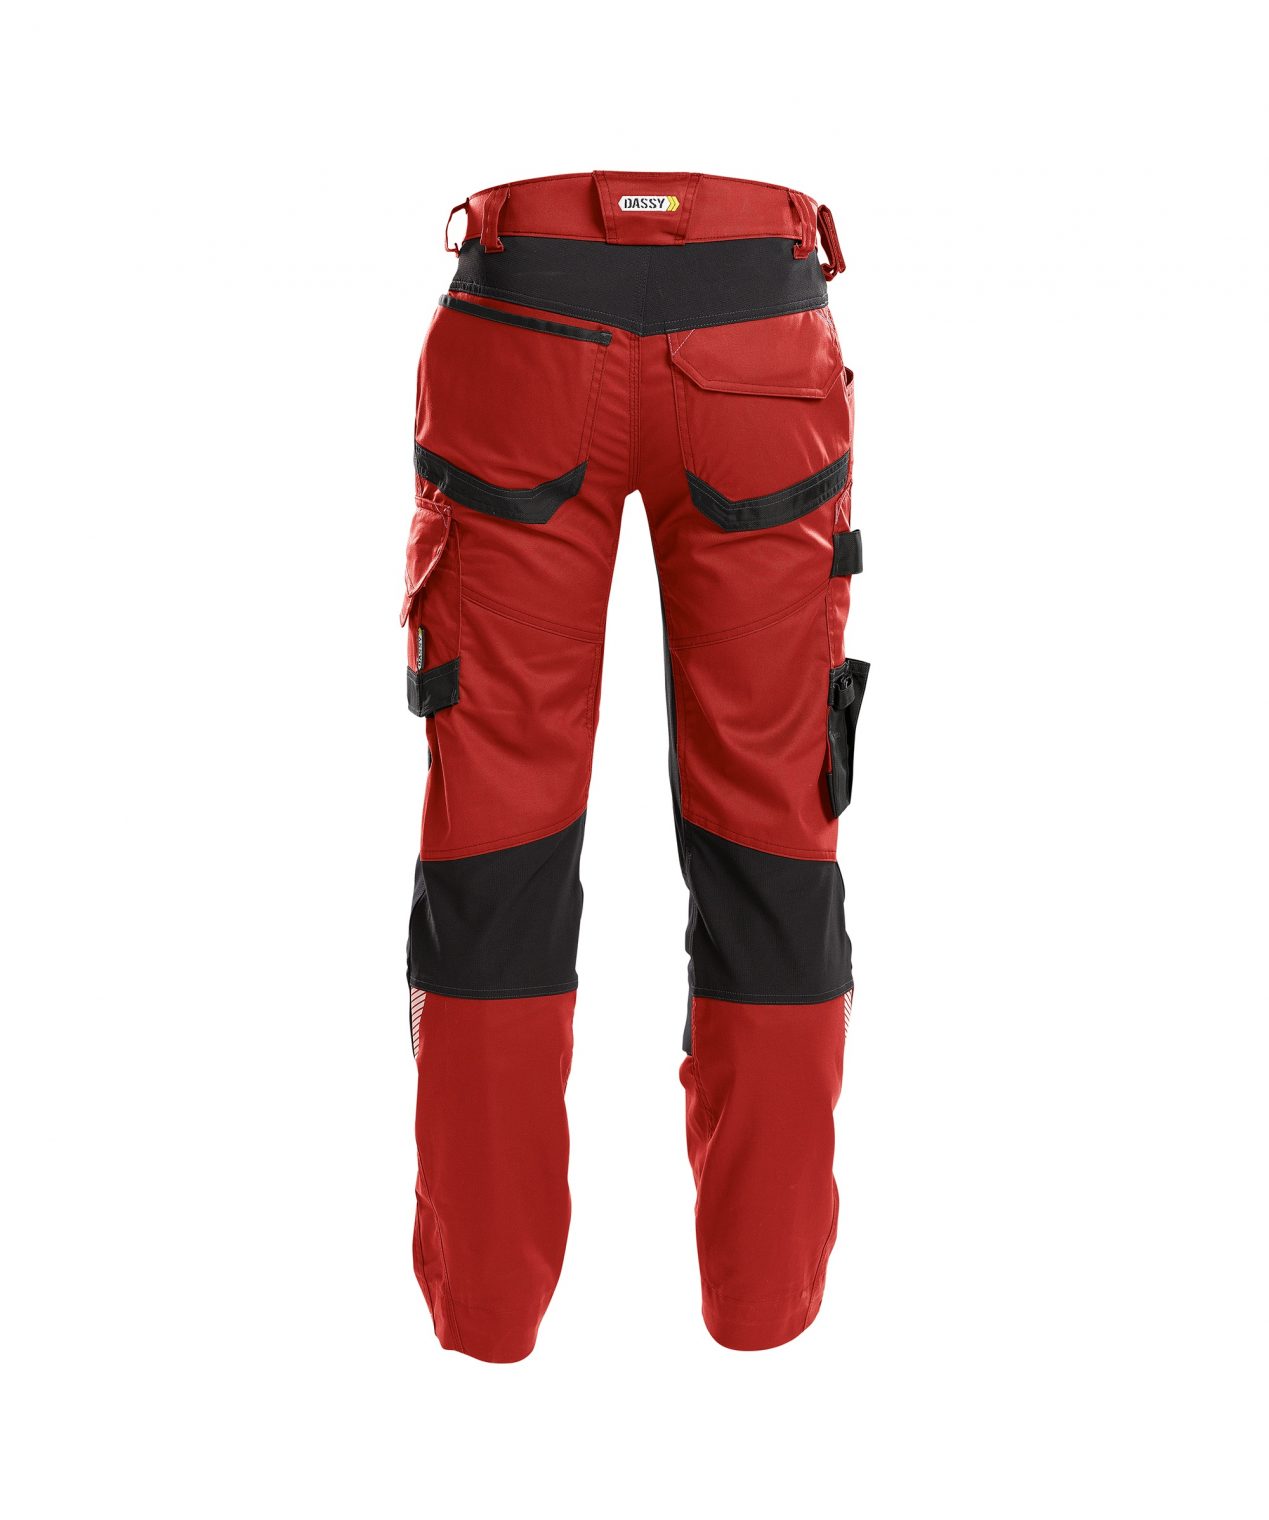 dynax work trousers with stretch and knee pockets red black back